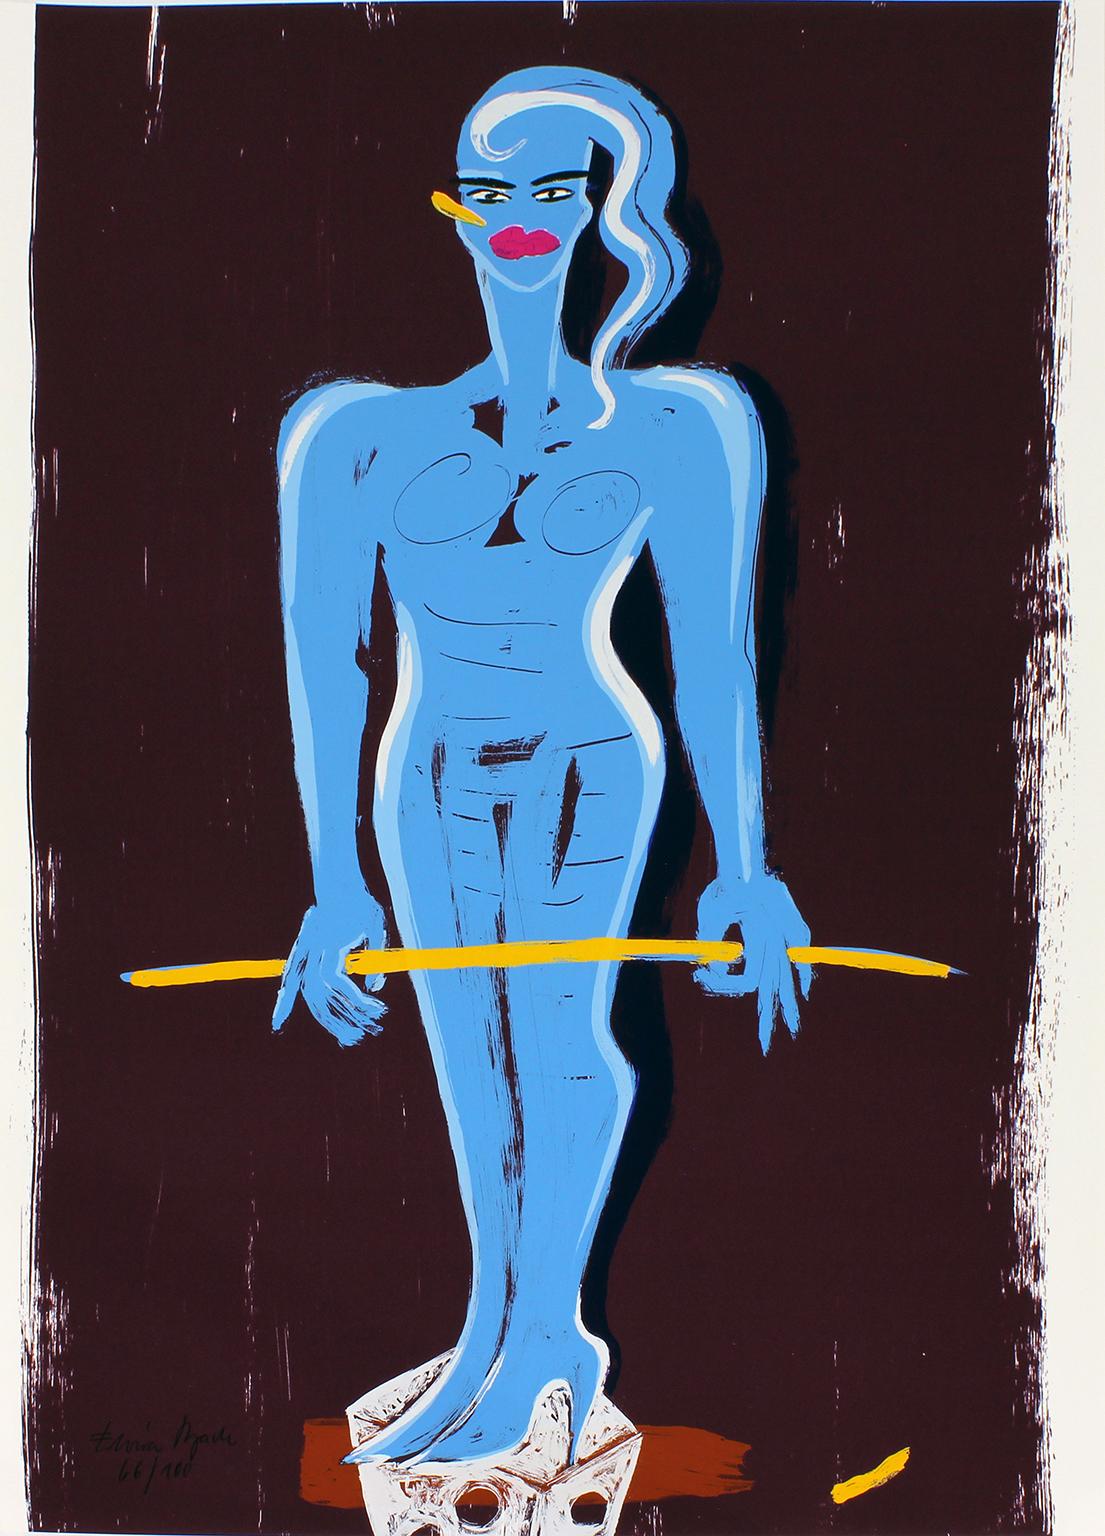 "Untitled" serigraph on smooth cardboard of woman in blue by artist Elvira Bach from the "Kinderstern" portfolio, published in 1989 by Edition Domberger to raise money to house families of children hospitalized with cancer. Signed Elvira Bach and